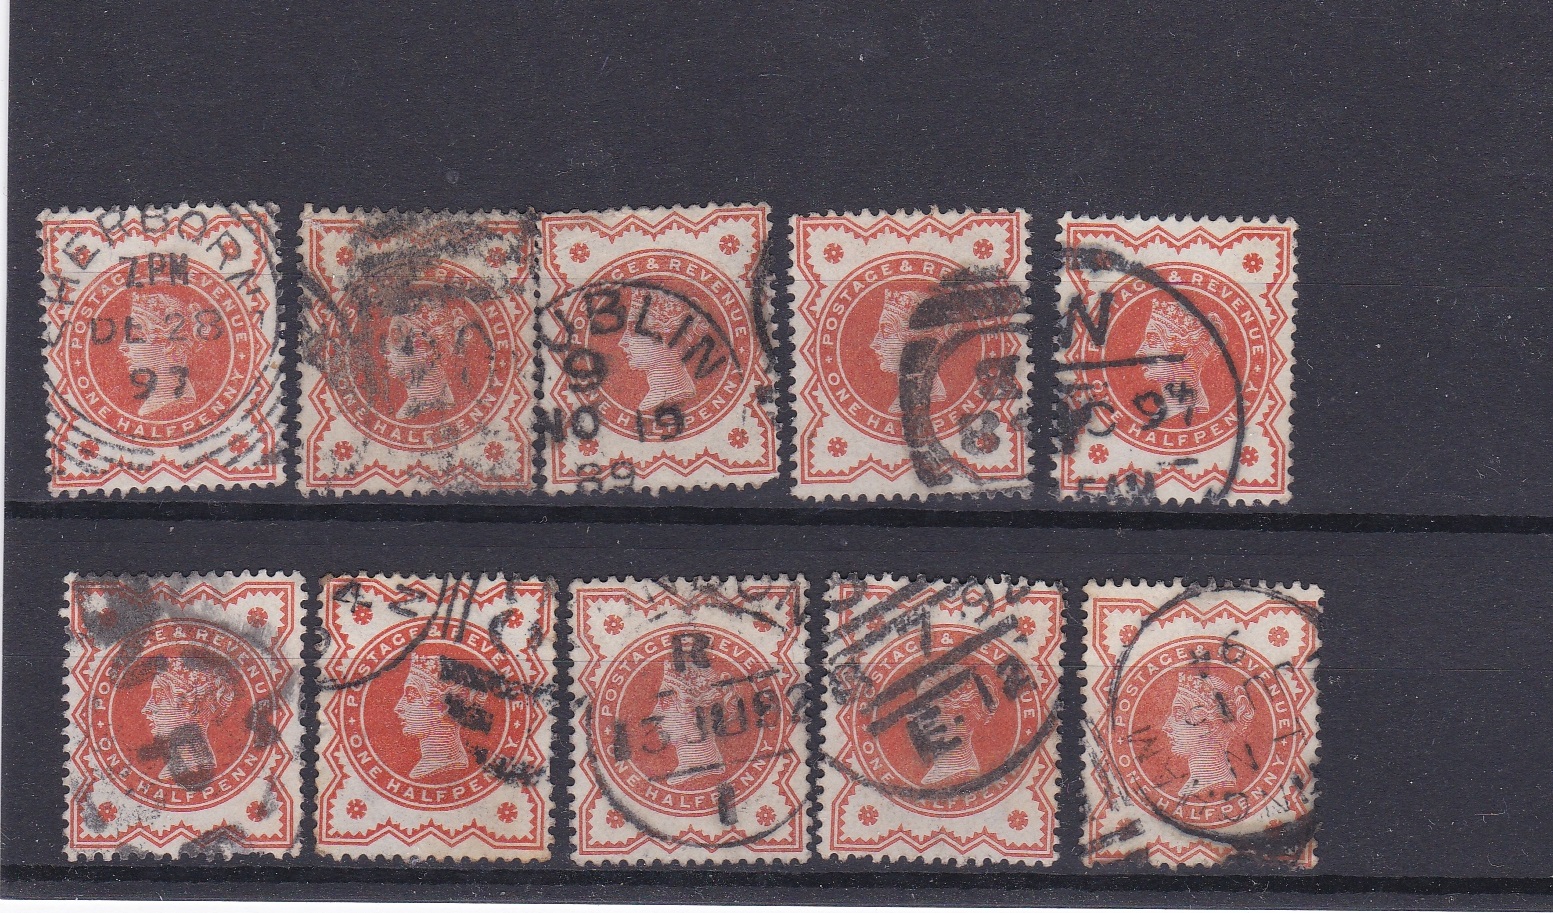 Great Britain 1887-1892-SG197 used 1/2d x10